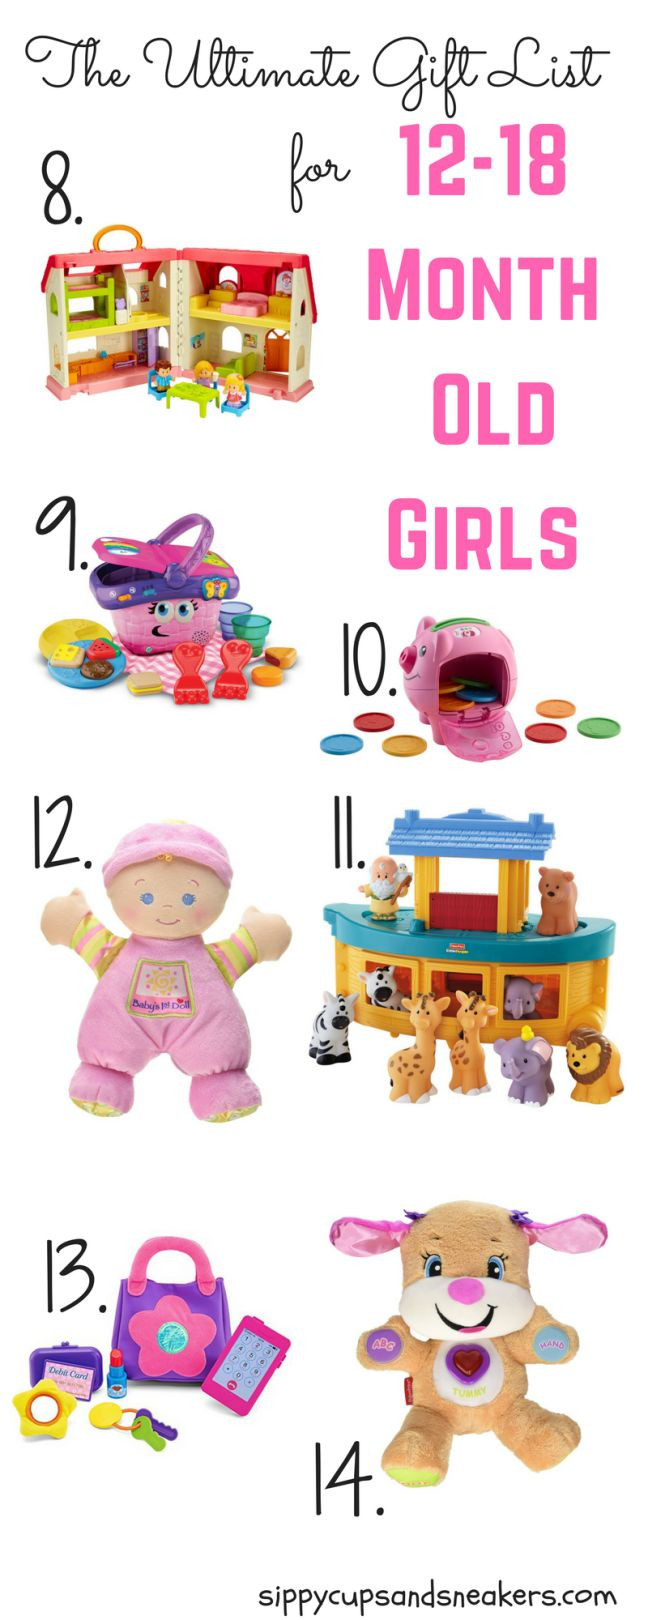 Christmas Gift Ideas For 6 Month Baby Girl
 The Ultimate Gift List for 12 18 Month Old Girls